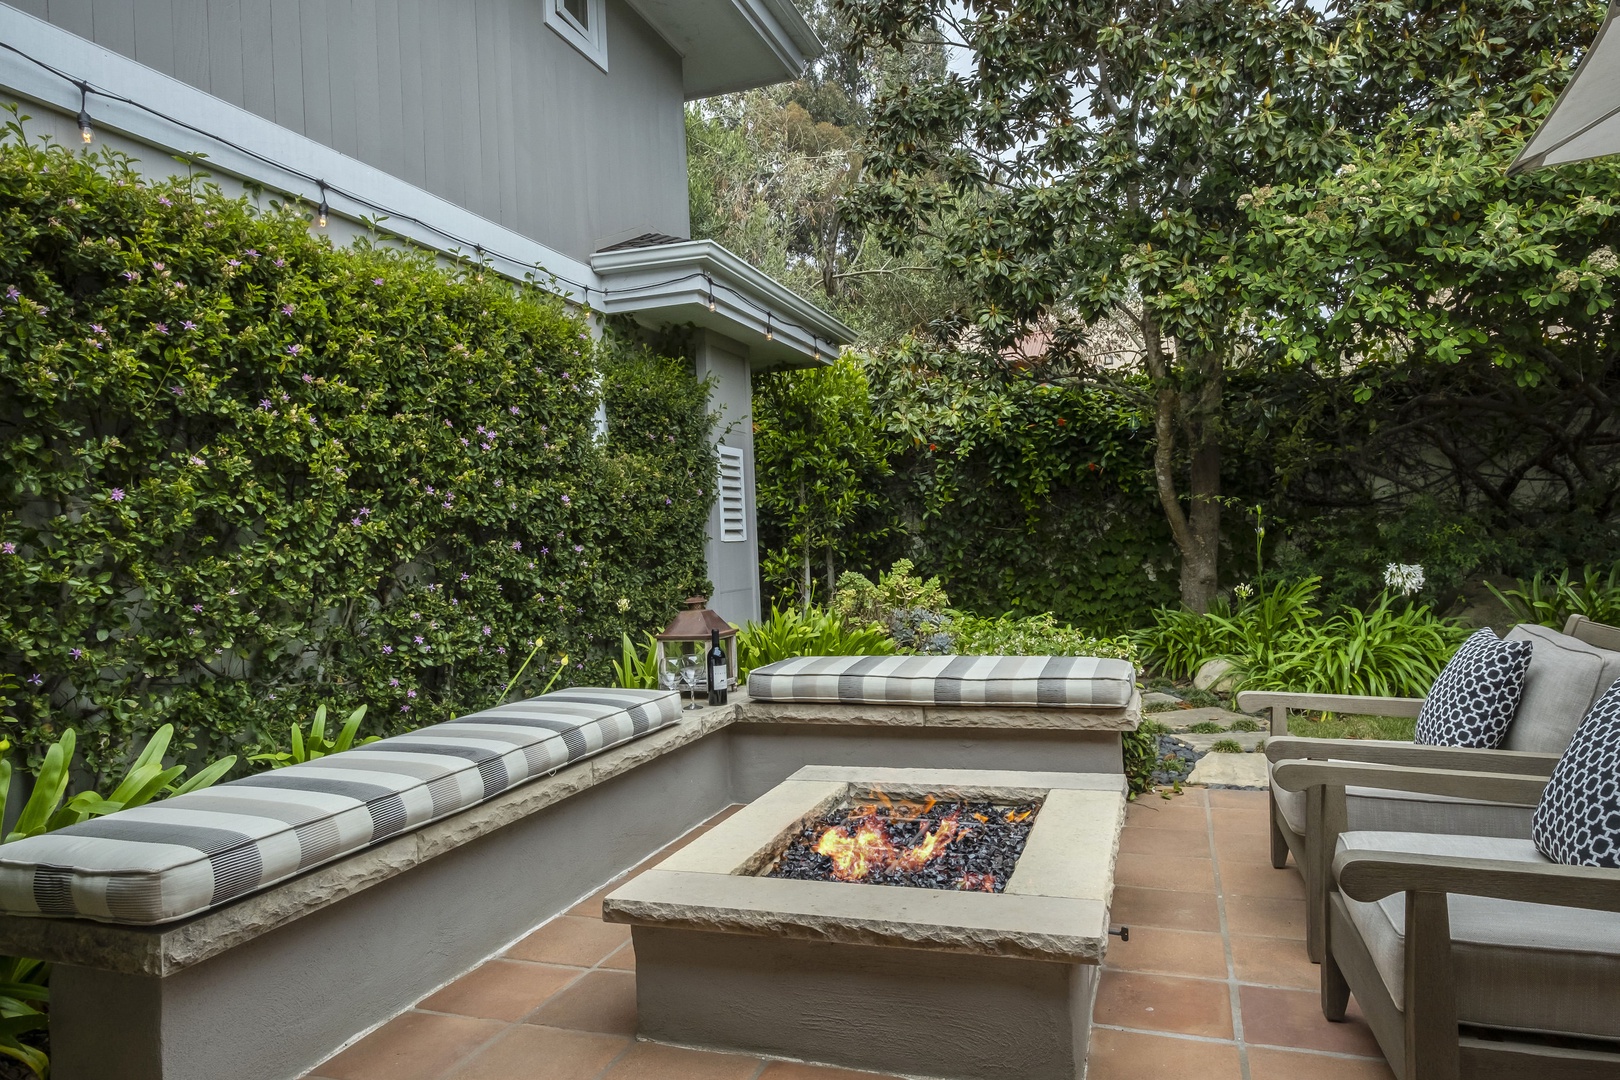 Beautiful backyard with firepit, conversational seating, and BBQ